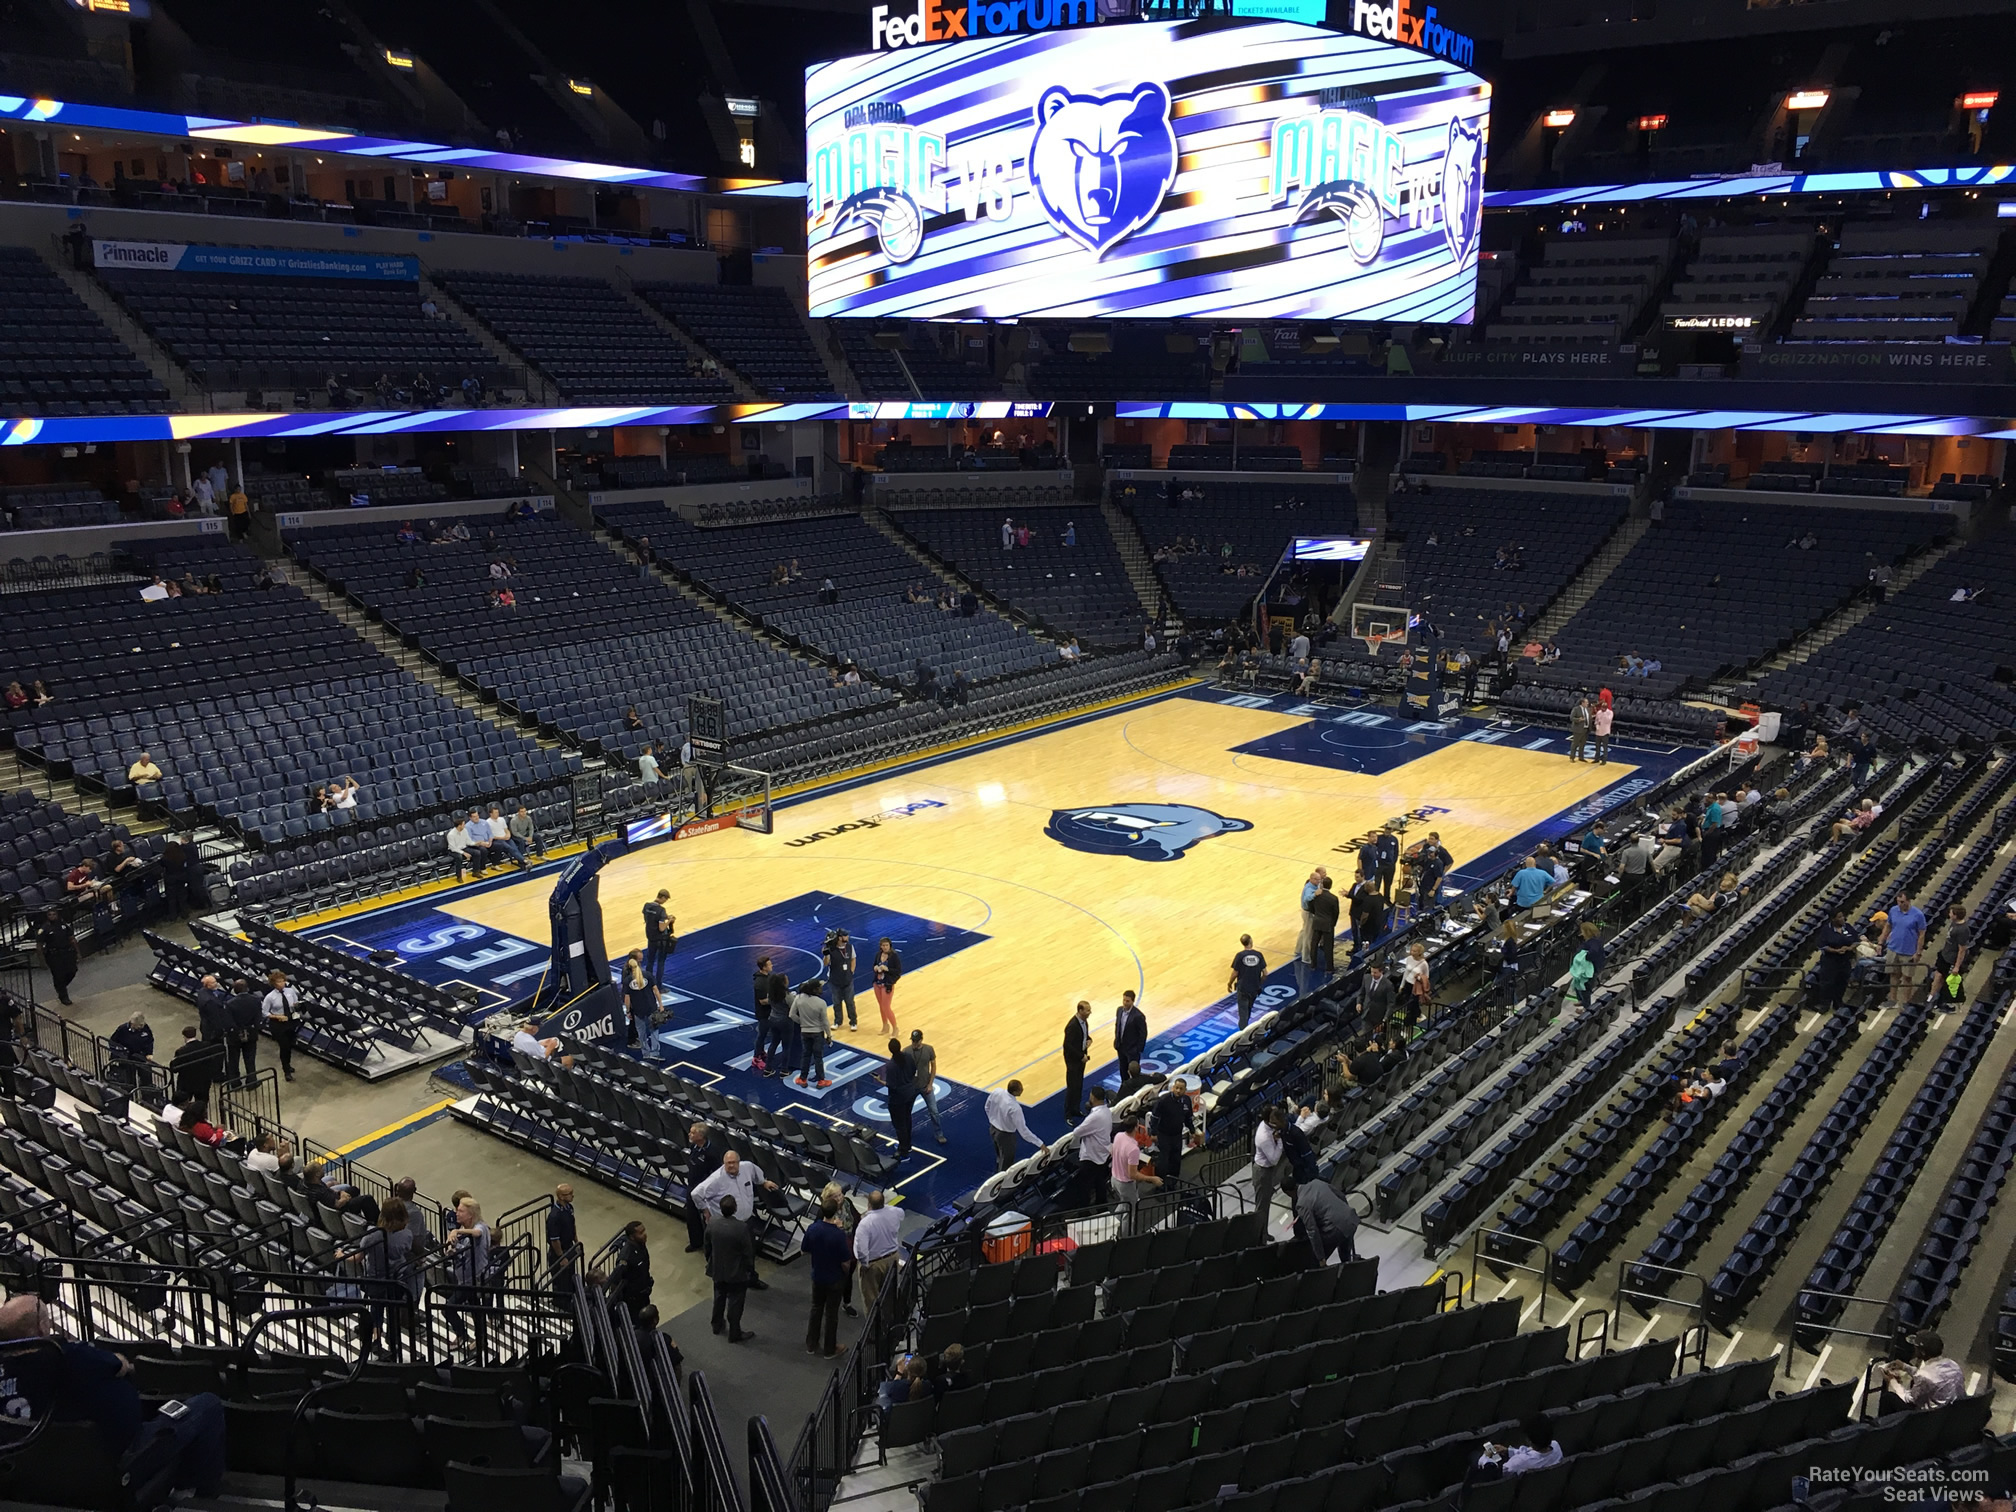 section 103a seat view  for basketball - fedex forum